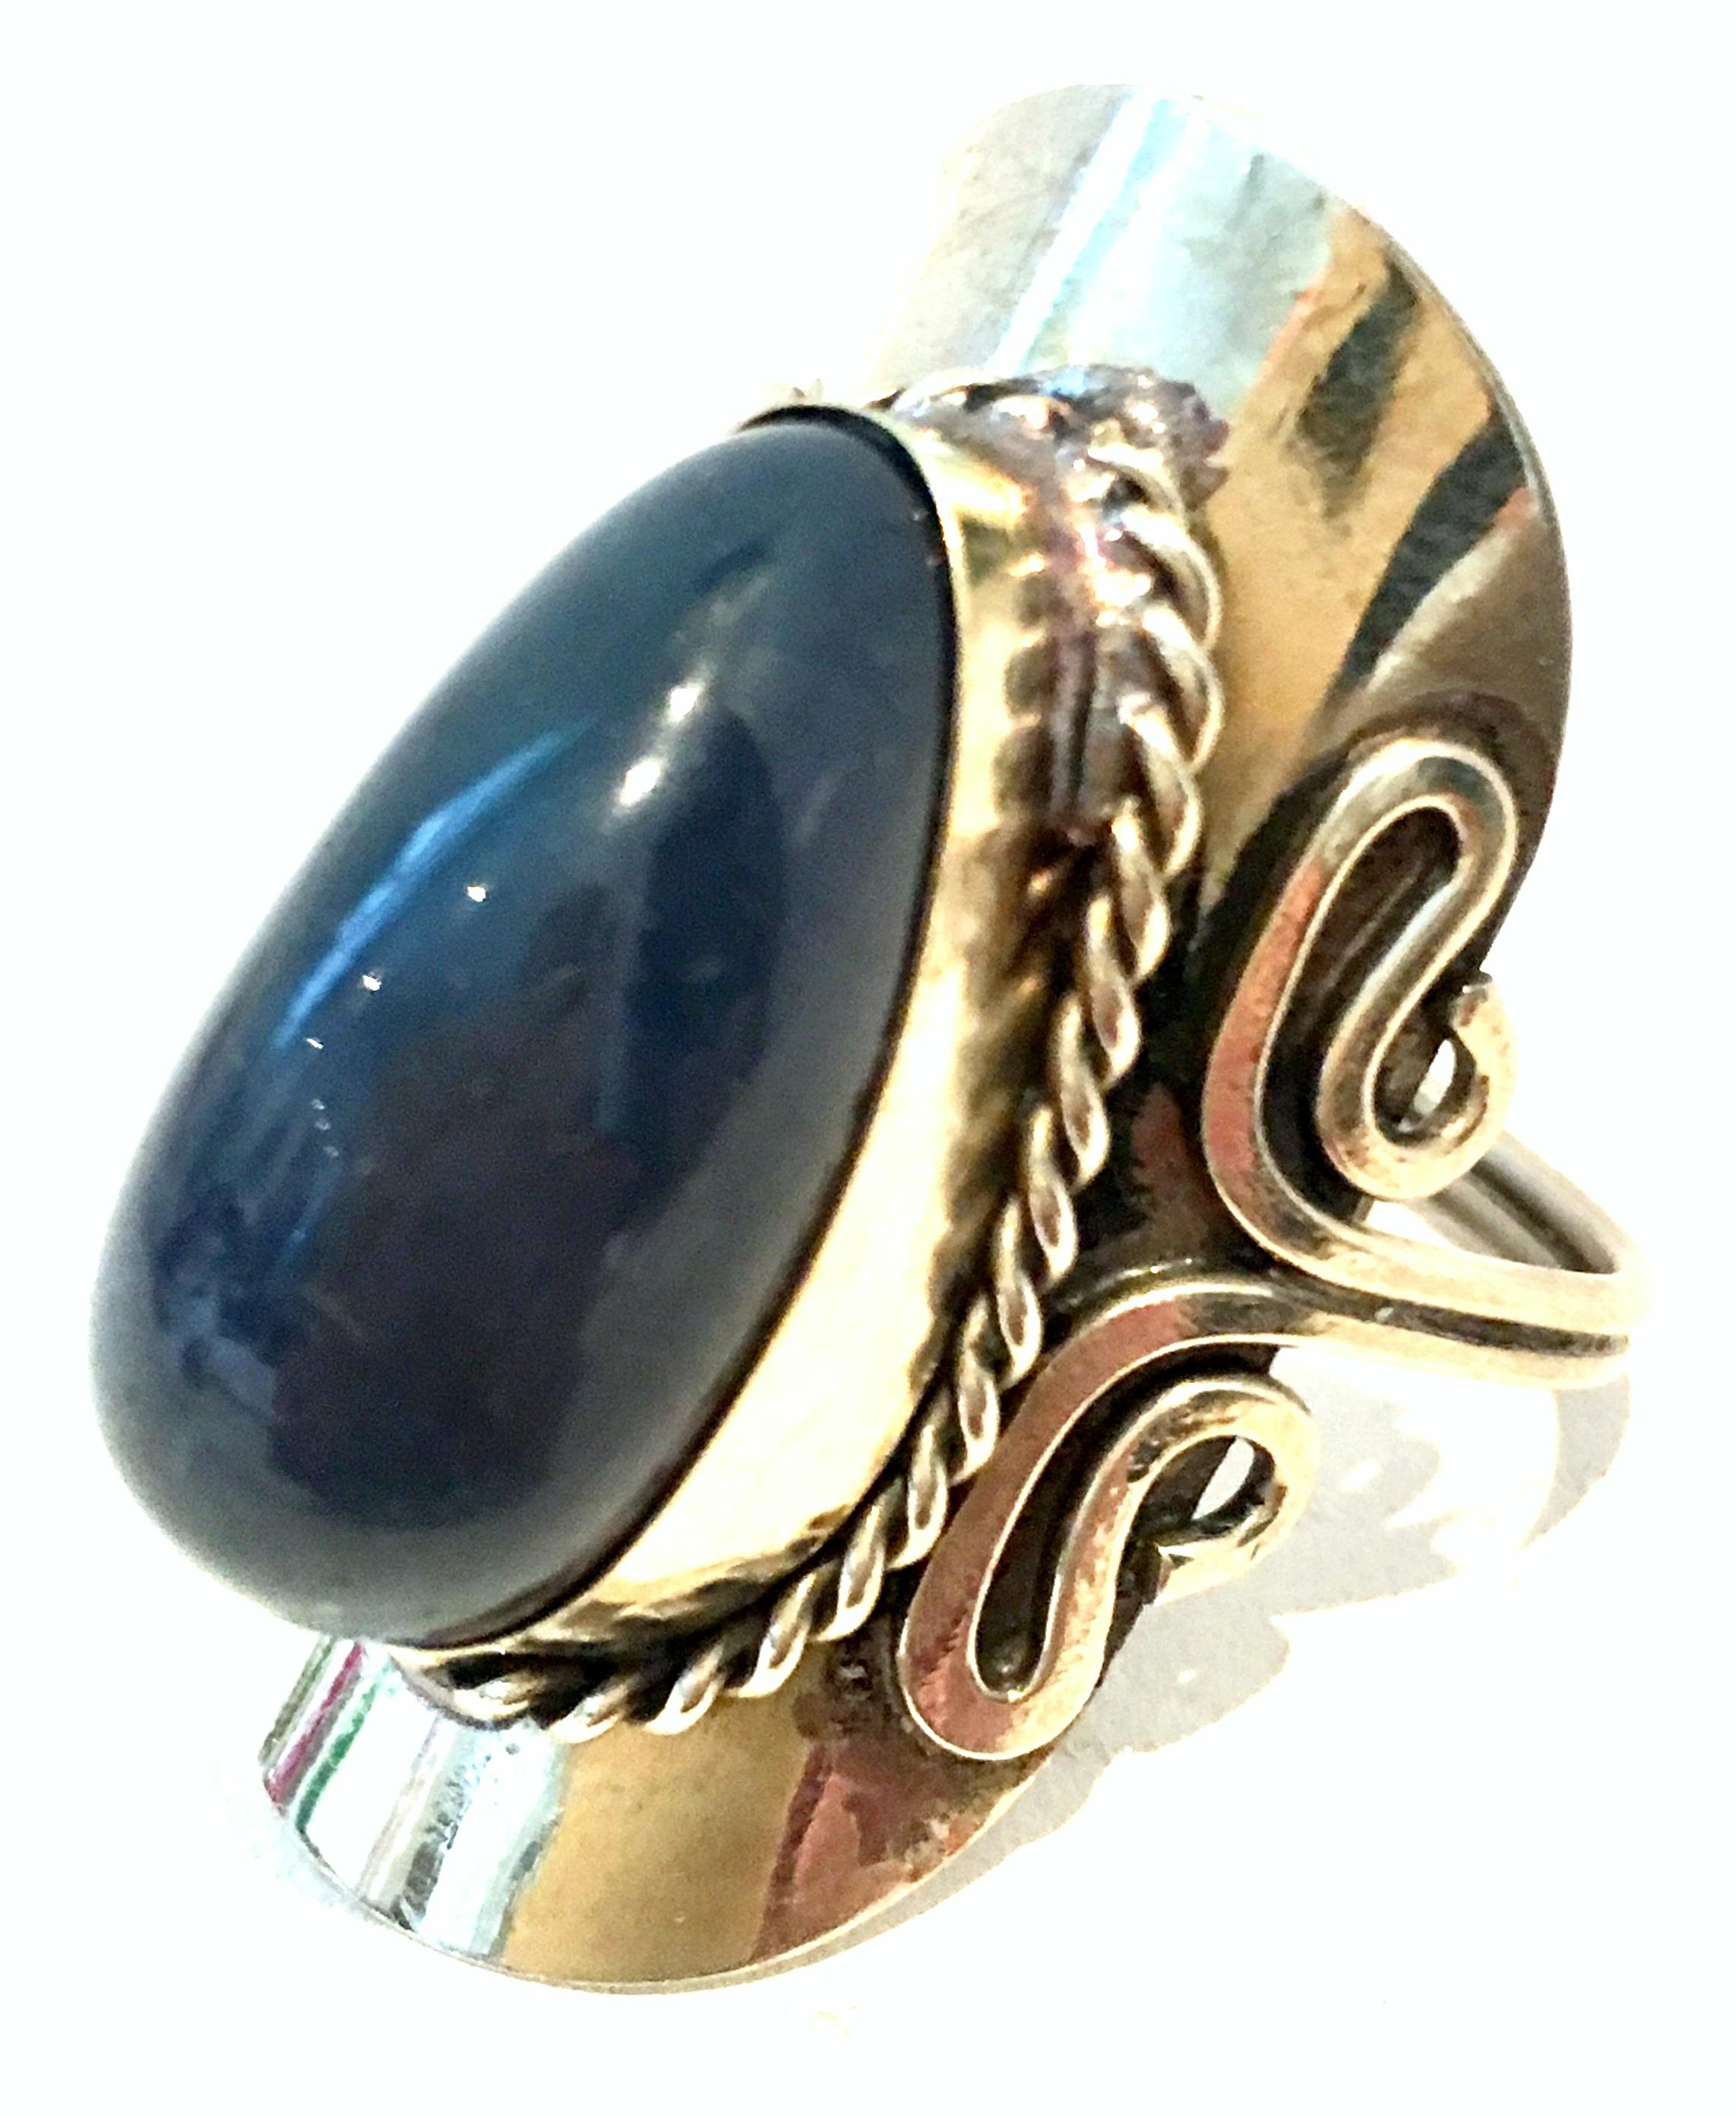 20th Century Sterling Silver & Lapis Lazuli Adjustable Ring Size- One Size. This sterling and large Lapis Lazuli stone adjustable ring can expand to an approximate size 11.  The central cabochon set oblong blue Lapis Lazuli stone measures